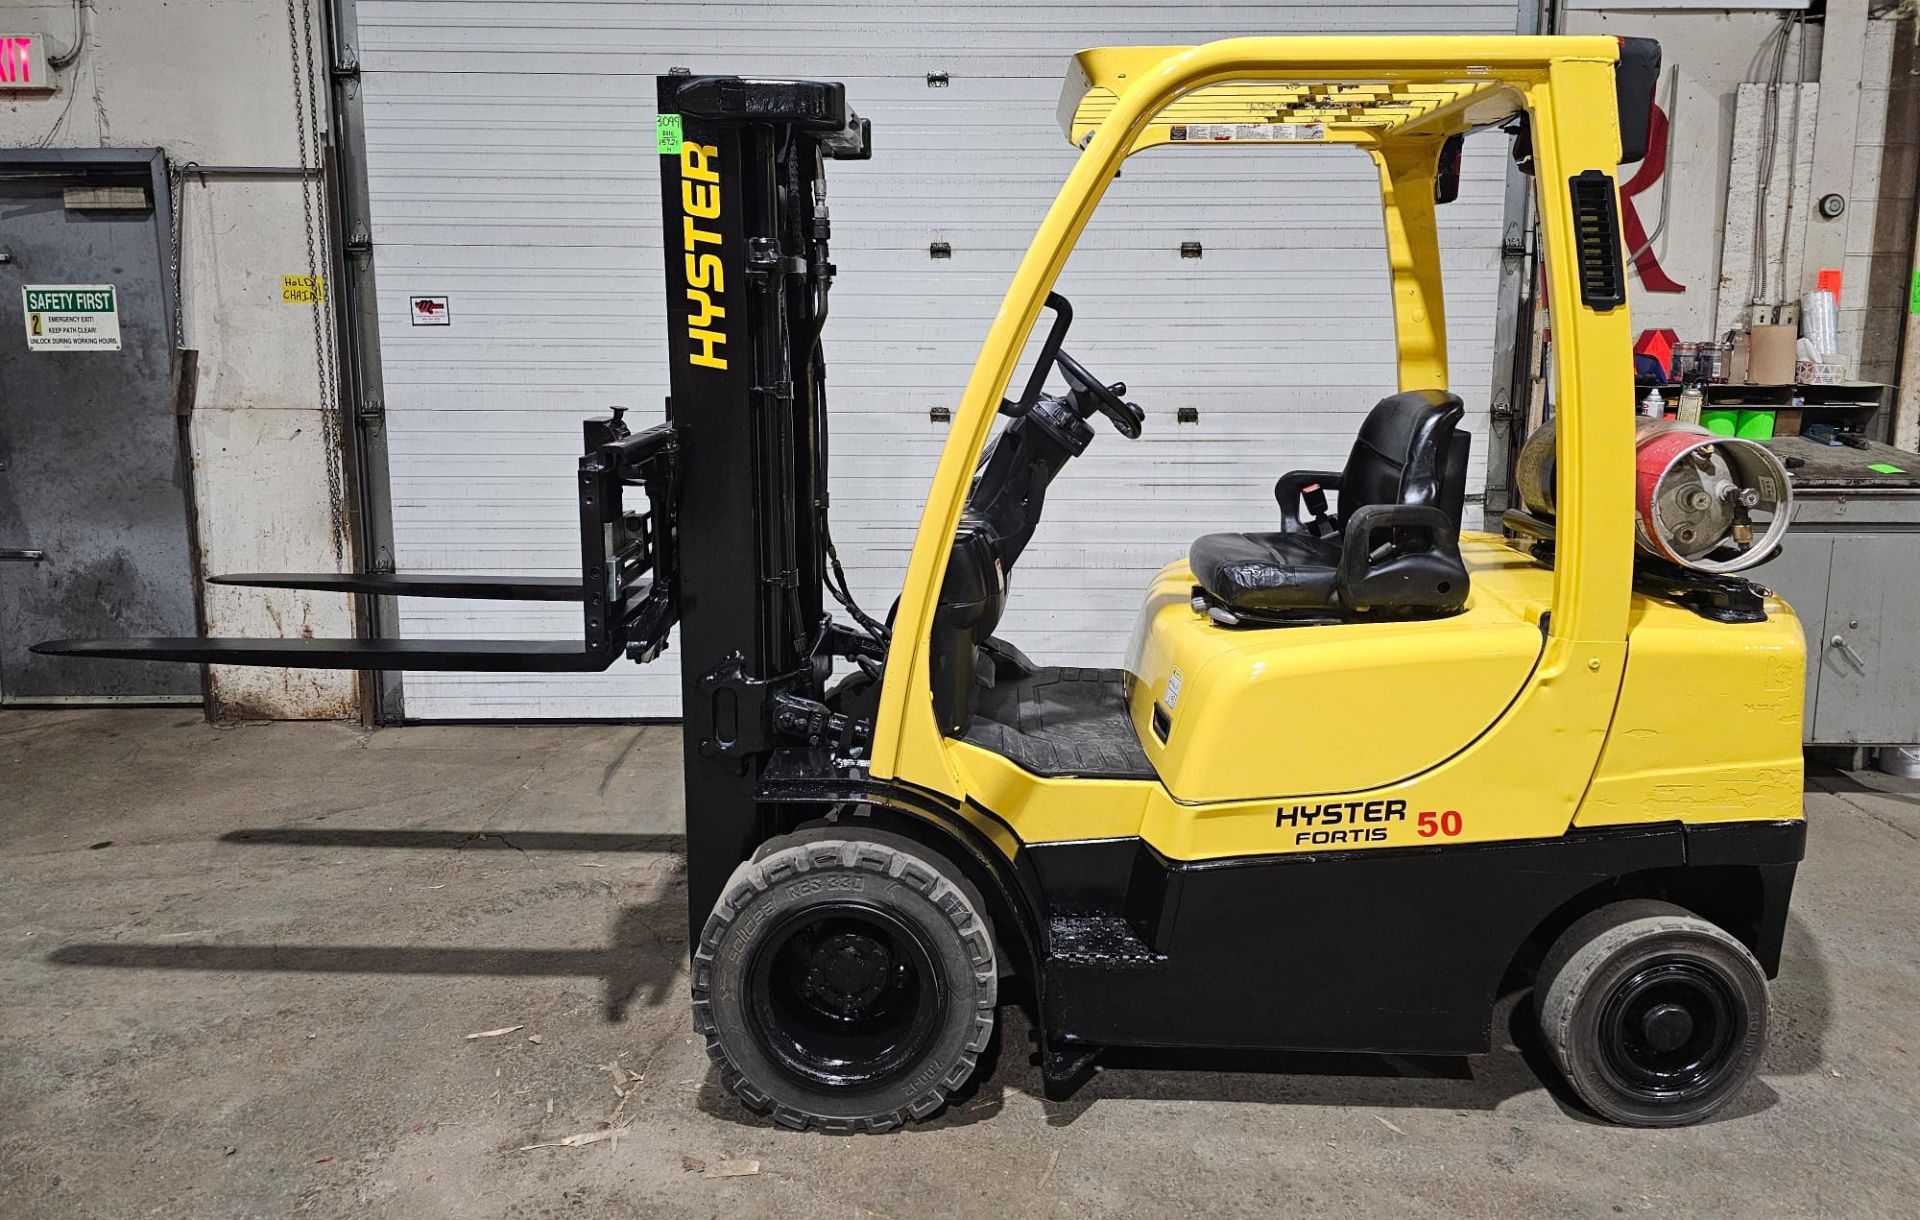 2010 Hyster 5,000lbs Capacity LPG (Propane) OUTDOOR Forklift sideshift positioner 3-STAGE MAST 189"